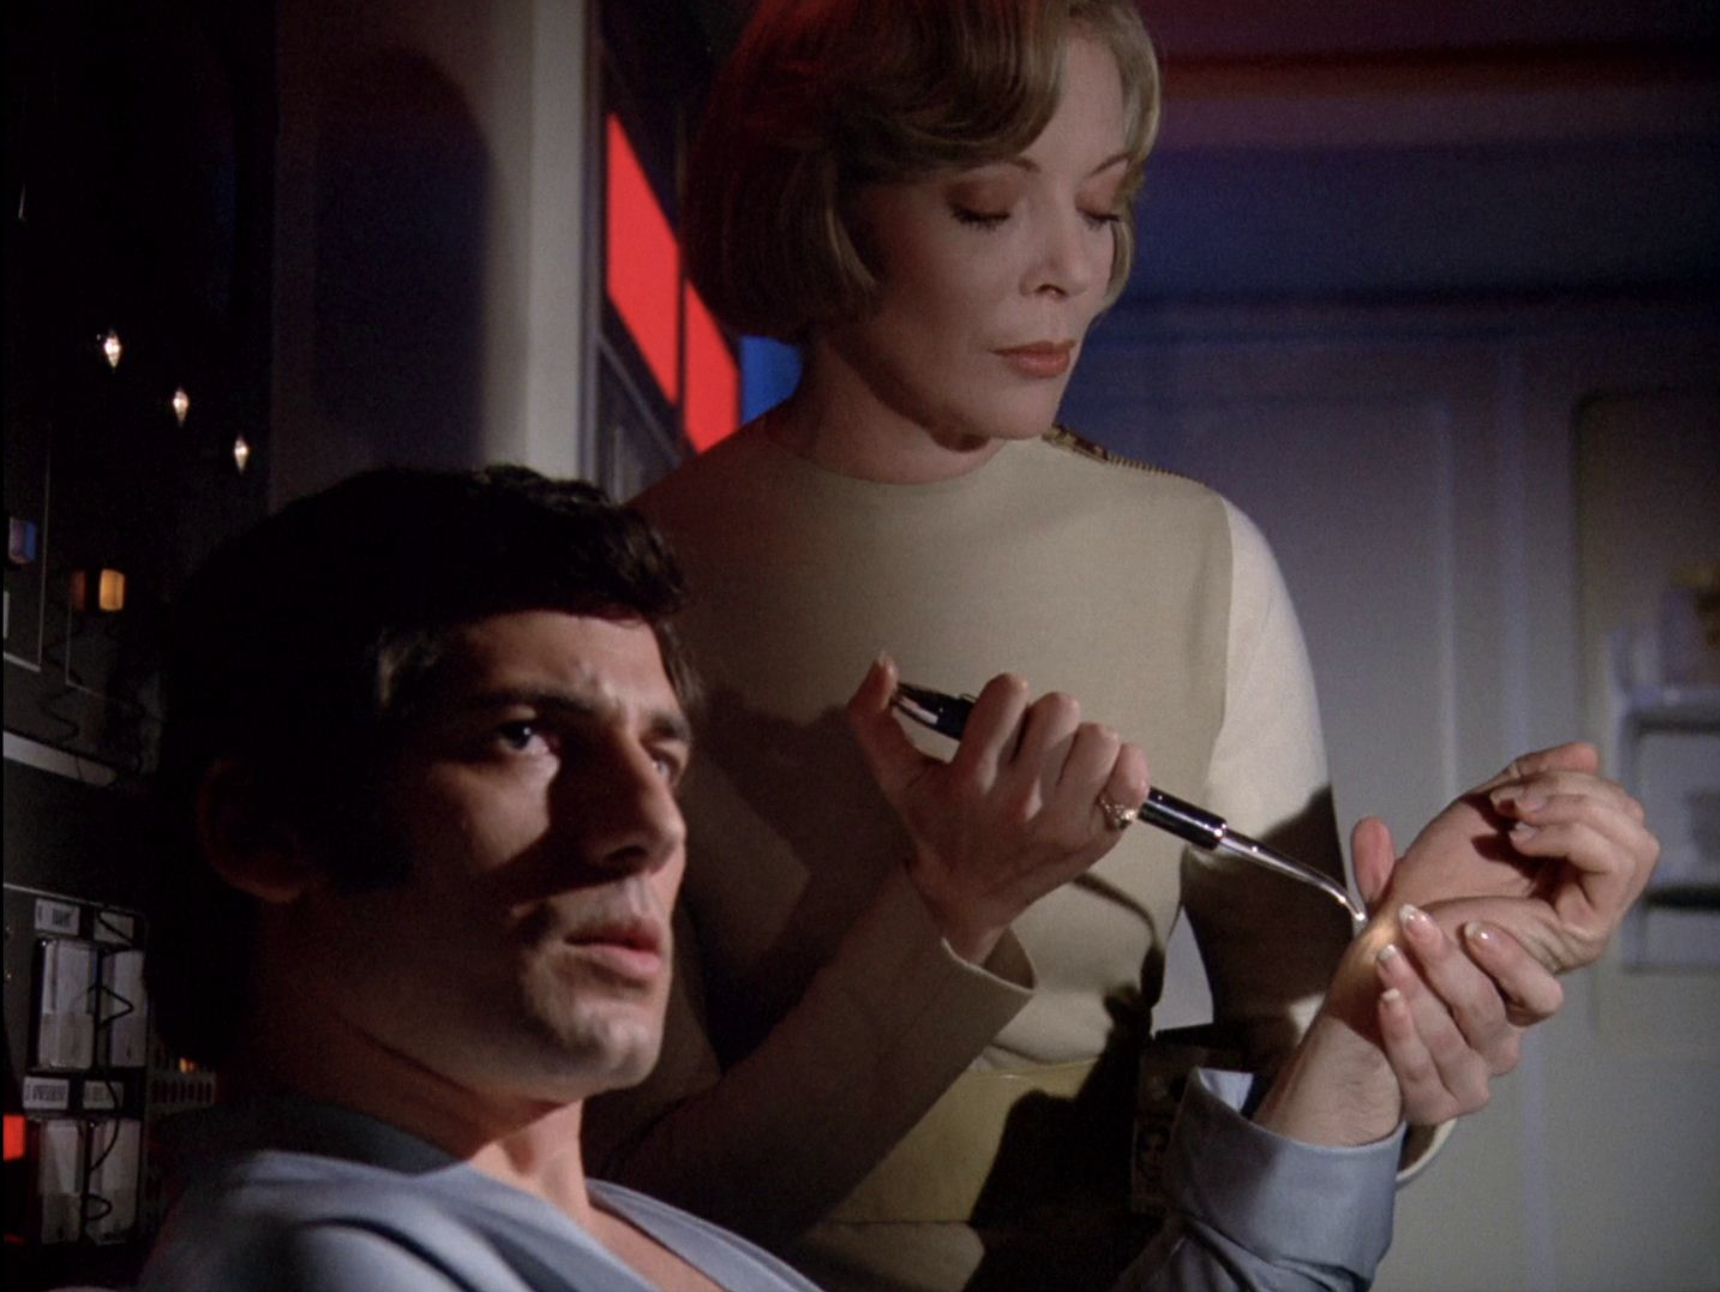  Helena Russell (Barbara Bain) holds a glowing pen-like device to Dr. Dan Mateo (Giancarlo Prete)'s wrist as he looks up at something out of shot..